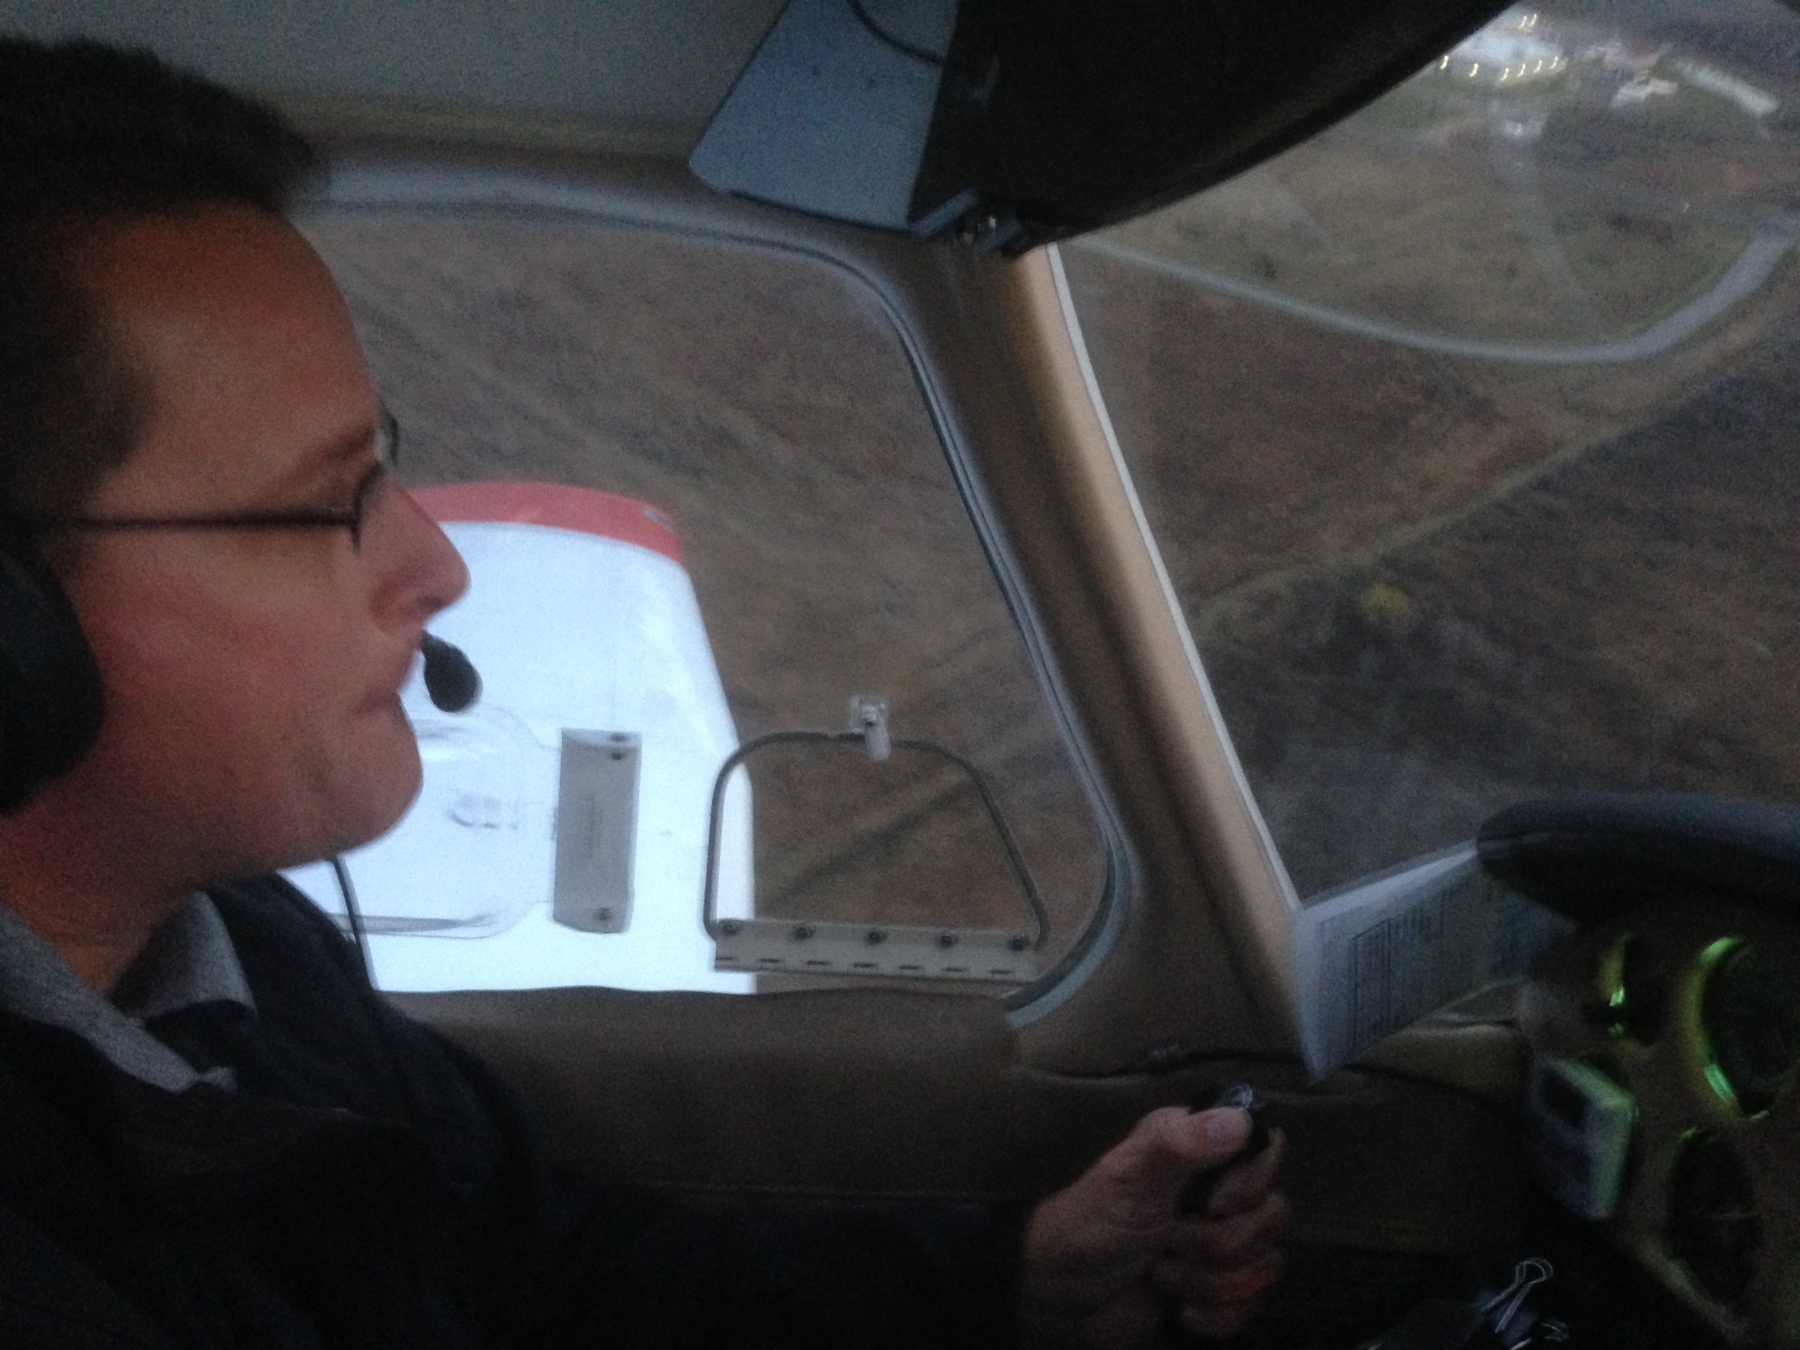 Dave Heinrich masterfully pilots his aircraft back to Buffalo-Lancaster, NY after his flight test